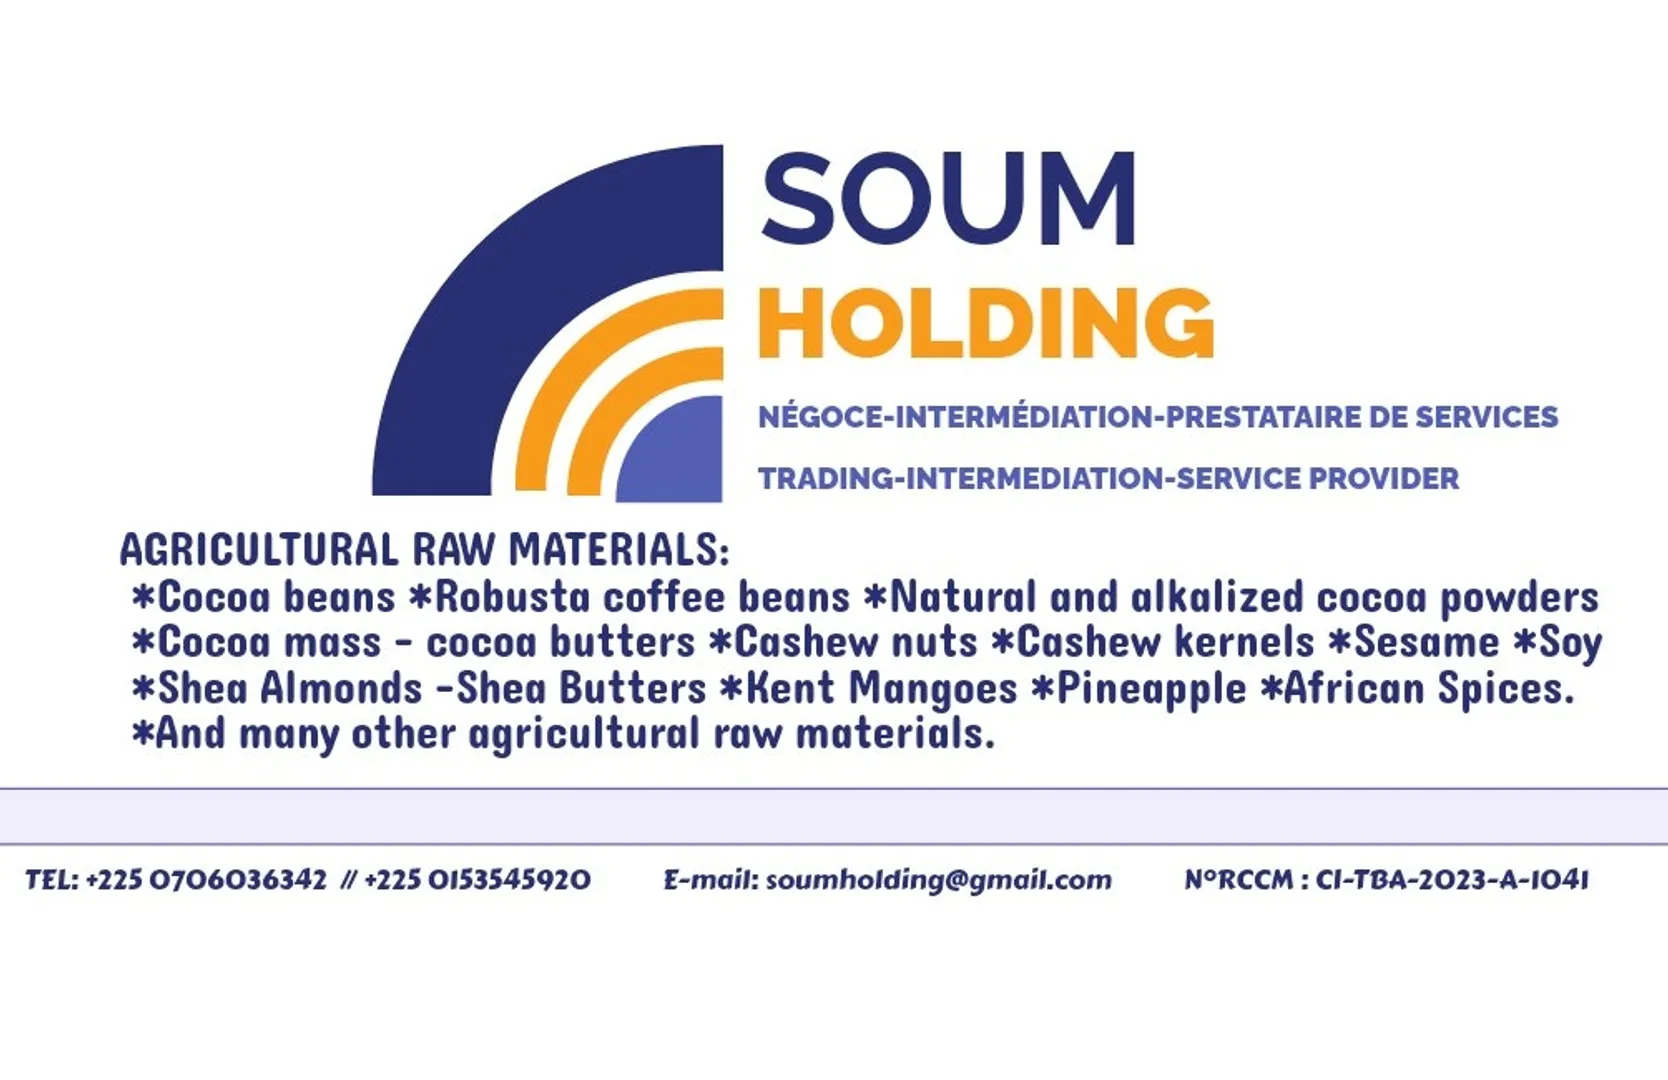 SOUM HOLDING is Mr. SOUMARO SOUALIO trader, intermediary and service provider.
 Mr. SOUMARO is a hands-on man for your research into agricultural raw materials.
 Mr. SOUMARO is a facilitator who will help you achieve your needs and objectives for agricultural raw materials.
 With his experience, his mobility and his mastery of the entire Ivory Coast, Mr. SOUMARO is serious, courageous and ambitious, he is the ideal partner who will support you for your needs for the following Ivorian agricultural products:

 *Cocoa beans              *Robusta coffee beans
 *Natural and alkalized cocoa powder.
 *Cocoa mass               *Cocoa butters
 *Raw cashews            *Cashew kernels
 *Shea almonds           *Shea butters
 *Kent mangoes          *Pineapples
 *Sesame grains.         *Winnowed soya
 *African spices           *And many other raw materials...

 SOUM HOLDING remains at your disposal for all your requests and needs for agricultural raw materials from Ivory Coast but also from throughout West Africa.

 Email: soumholding@gmail.com
 WhatsApp: +225 0706036342
 Telephone: +225 0706036342
                       +225 0153545920
 SOUM HOLDING.
 TRADING-INTERMEDIATION-SERVICE PROVIDER.
 Your Trusted Partner for SAFE Trading.